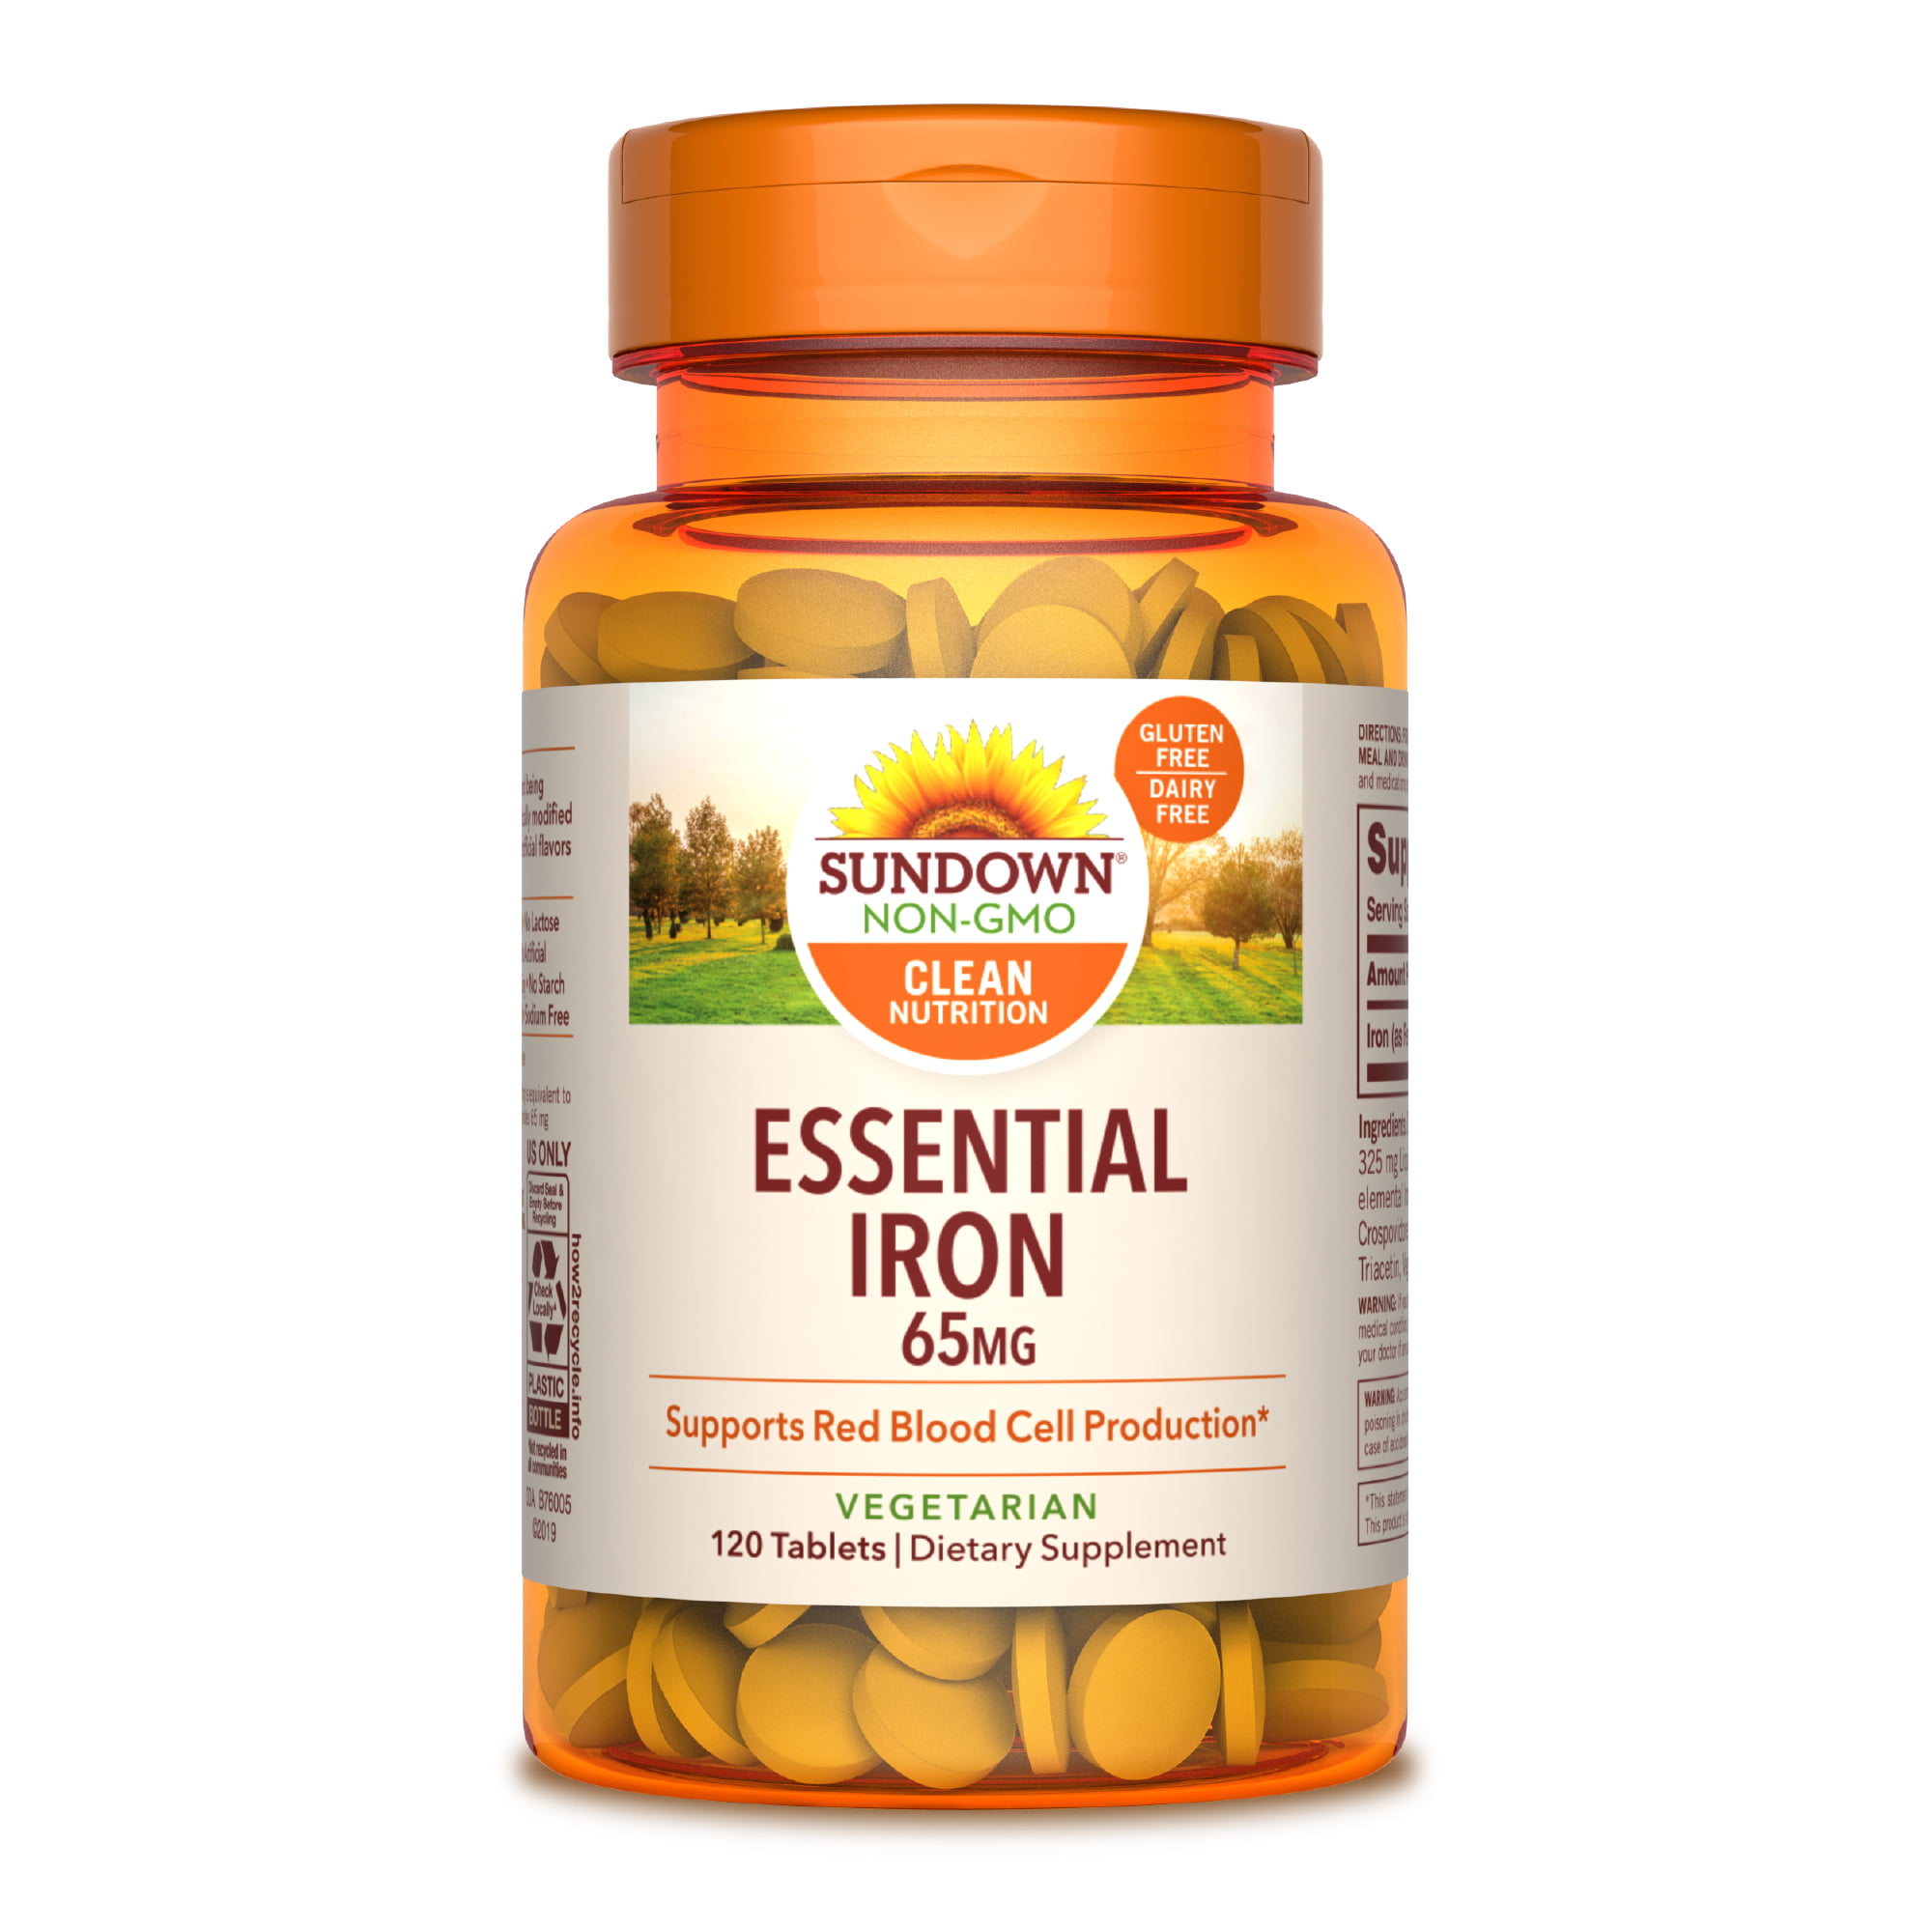 Sundown Iron Ferrous Sulfate 65 mg, 120 Count (Packaging May Vary)